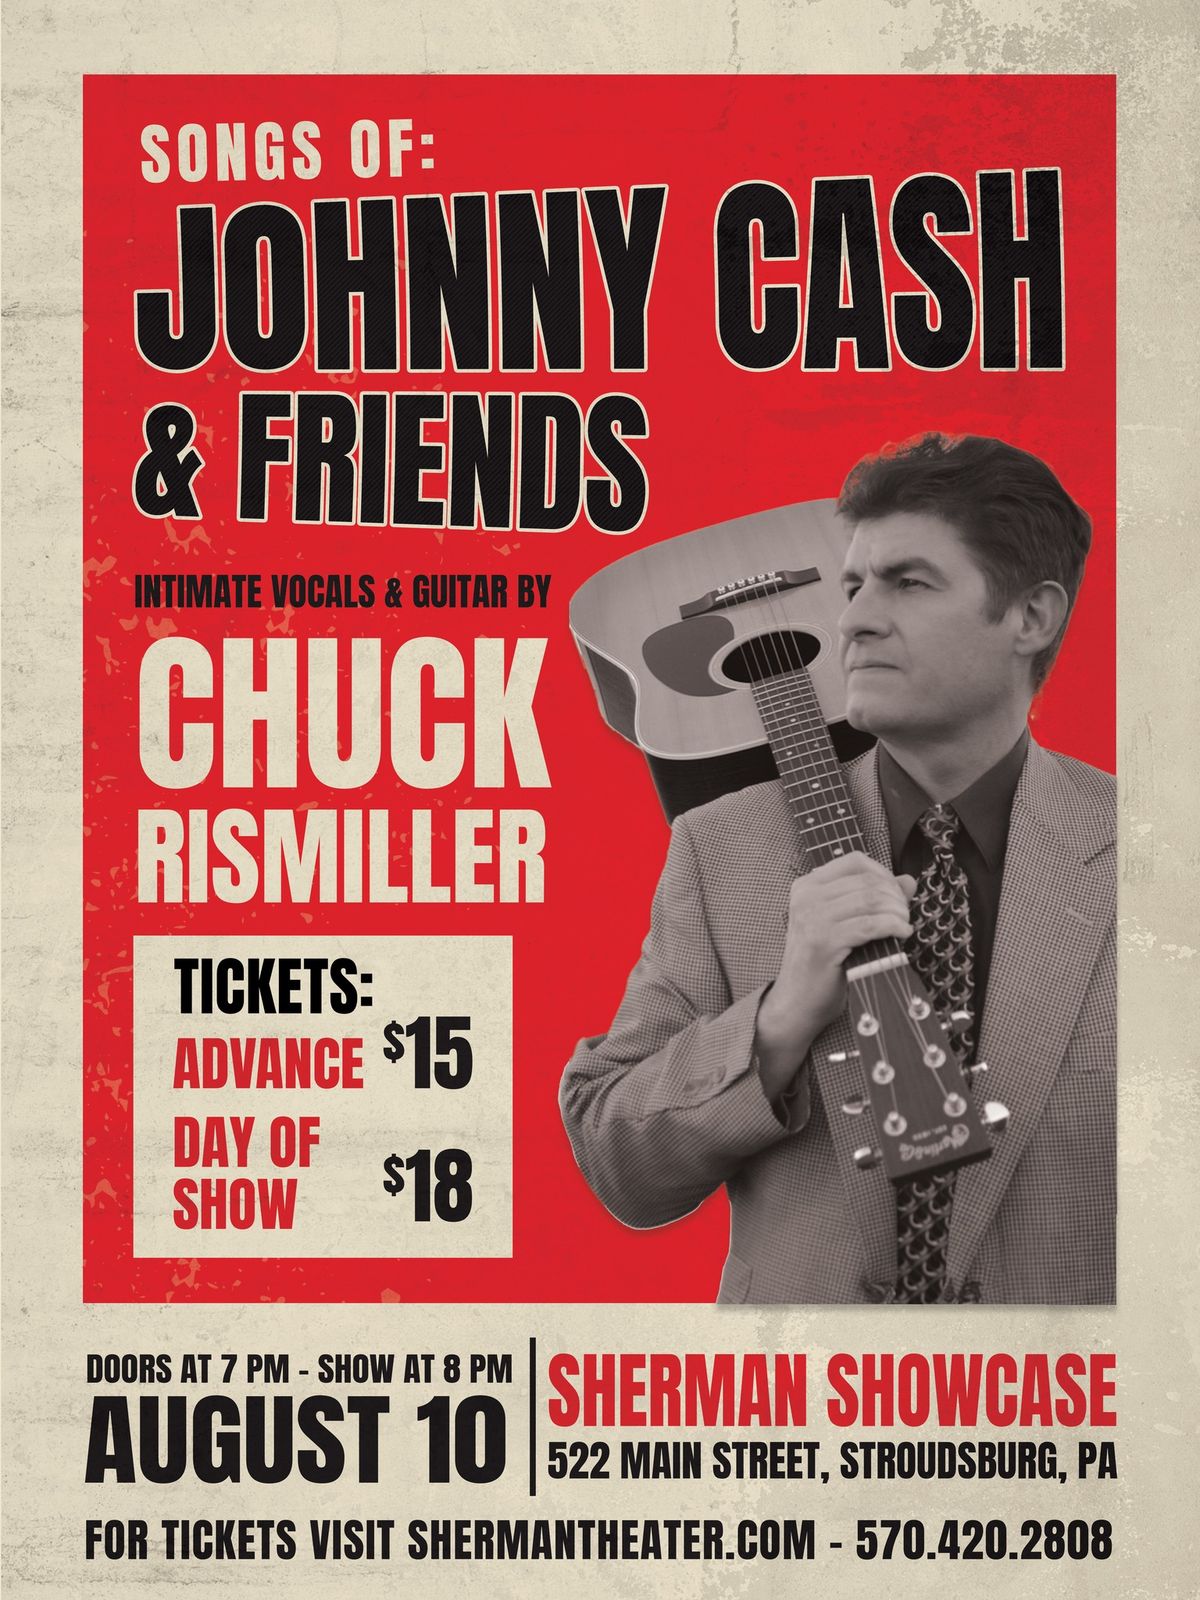 Songs of Johnny Cash & Friends